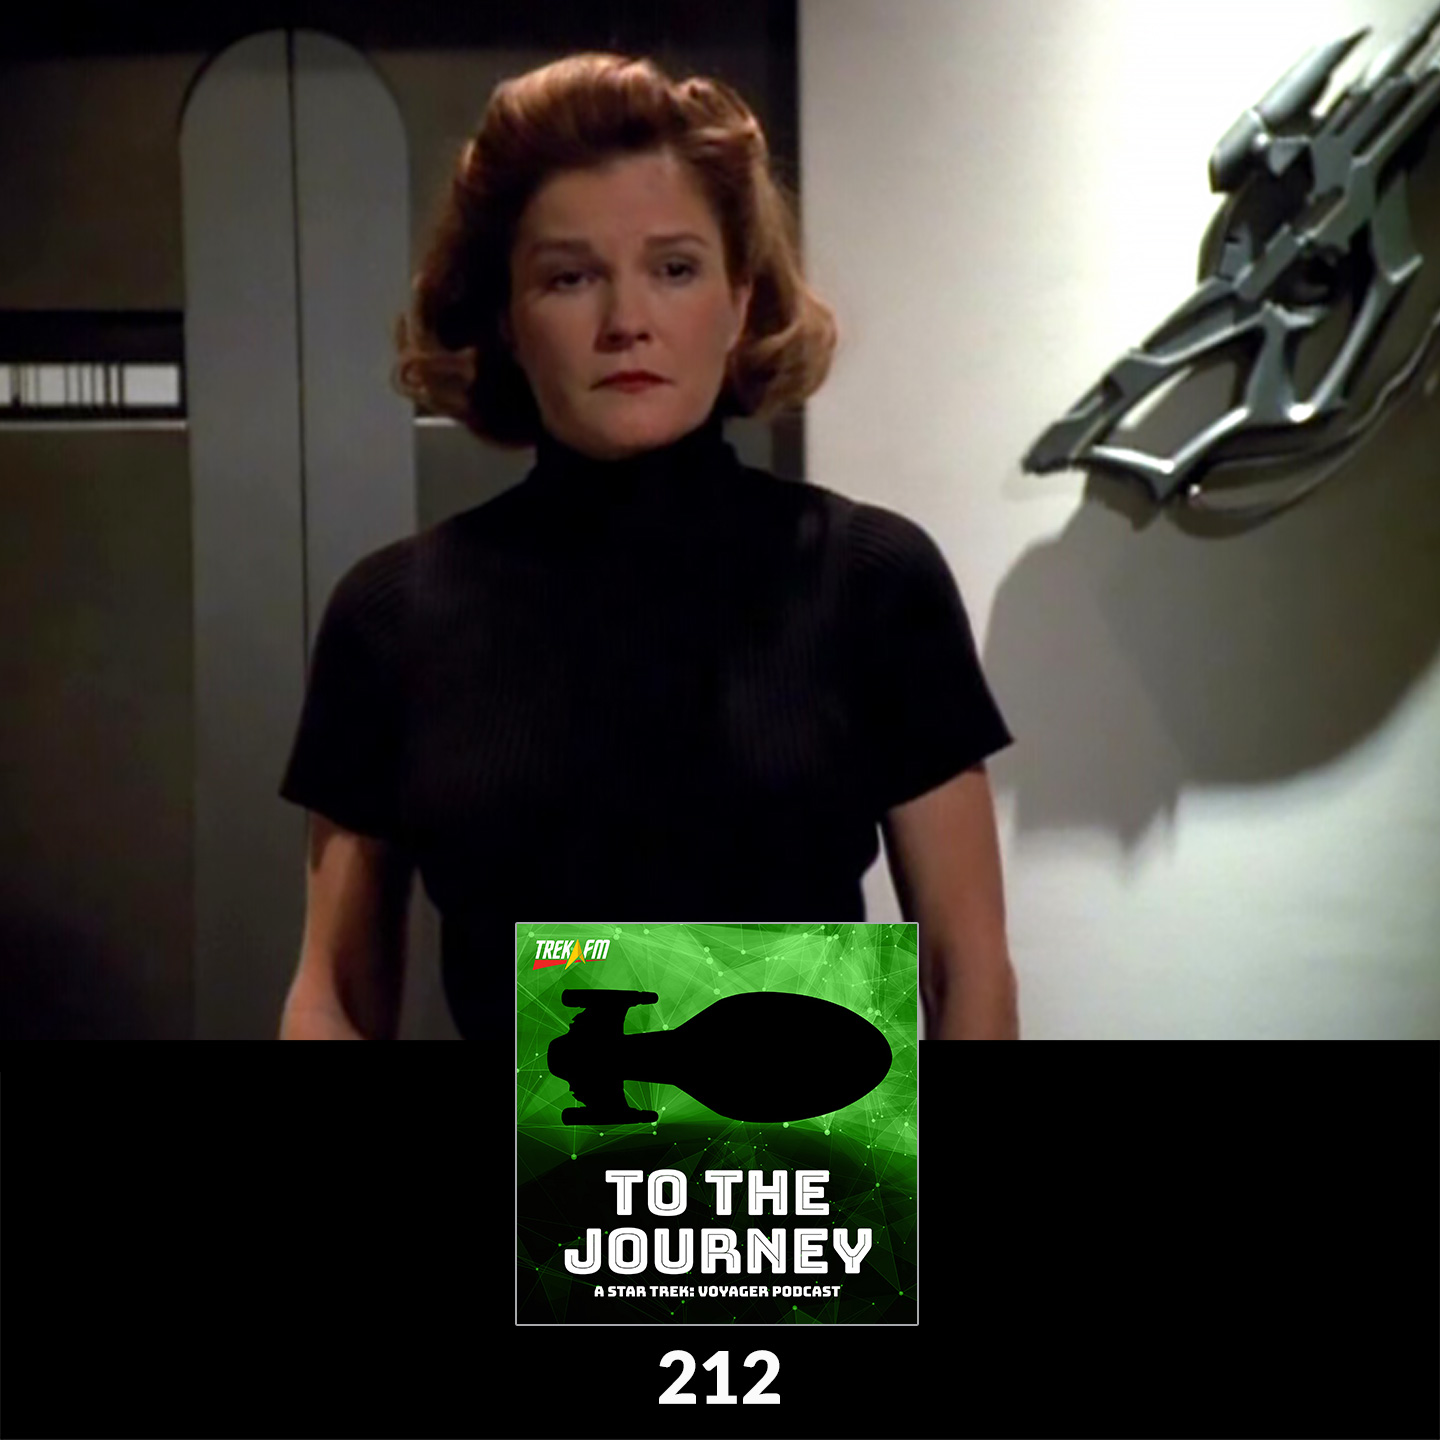 To The Journey 212: Black is the New Black - Voyager Costumes